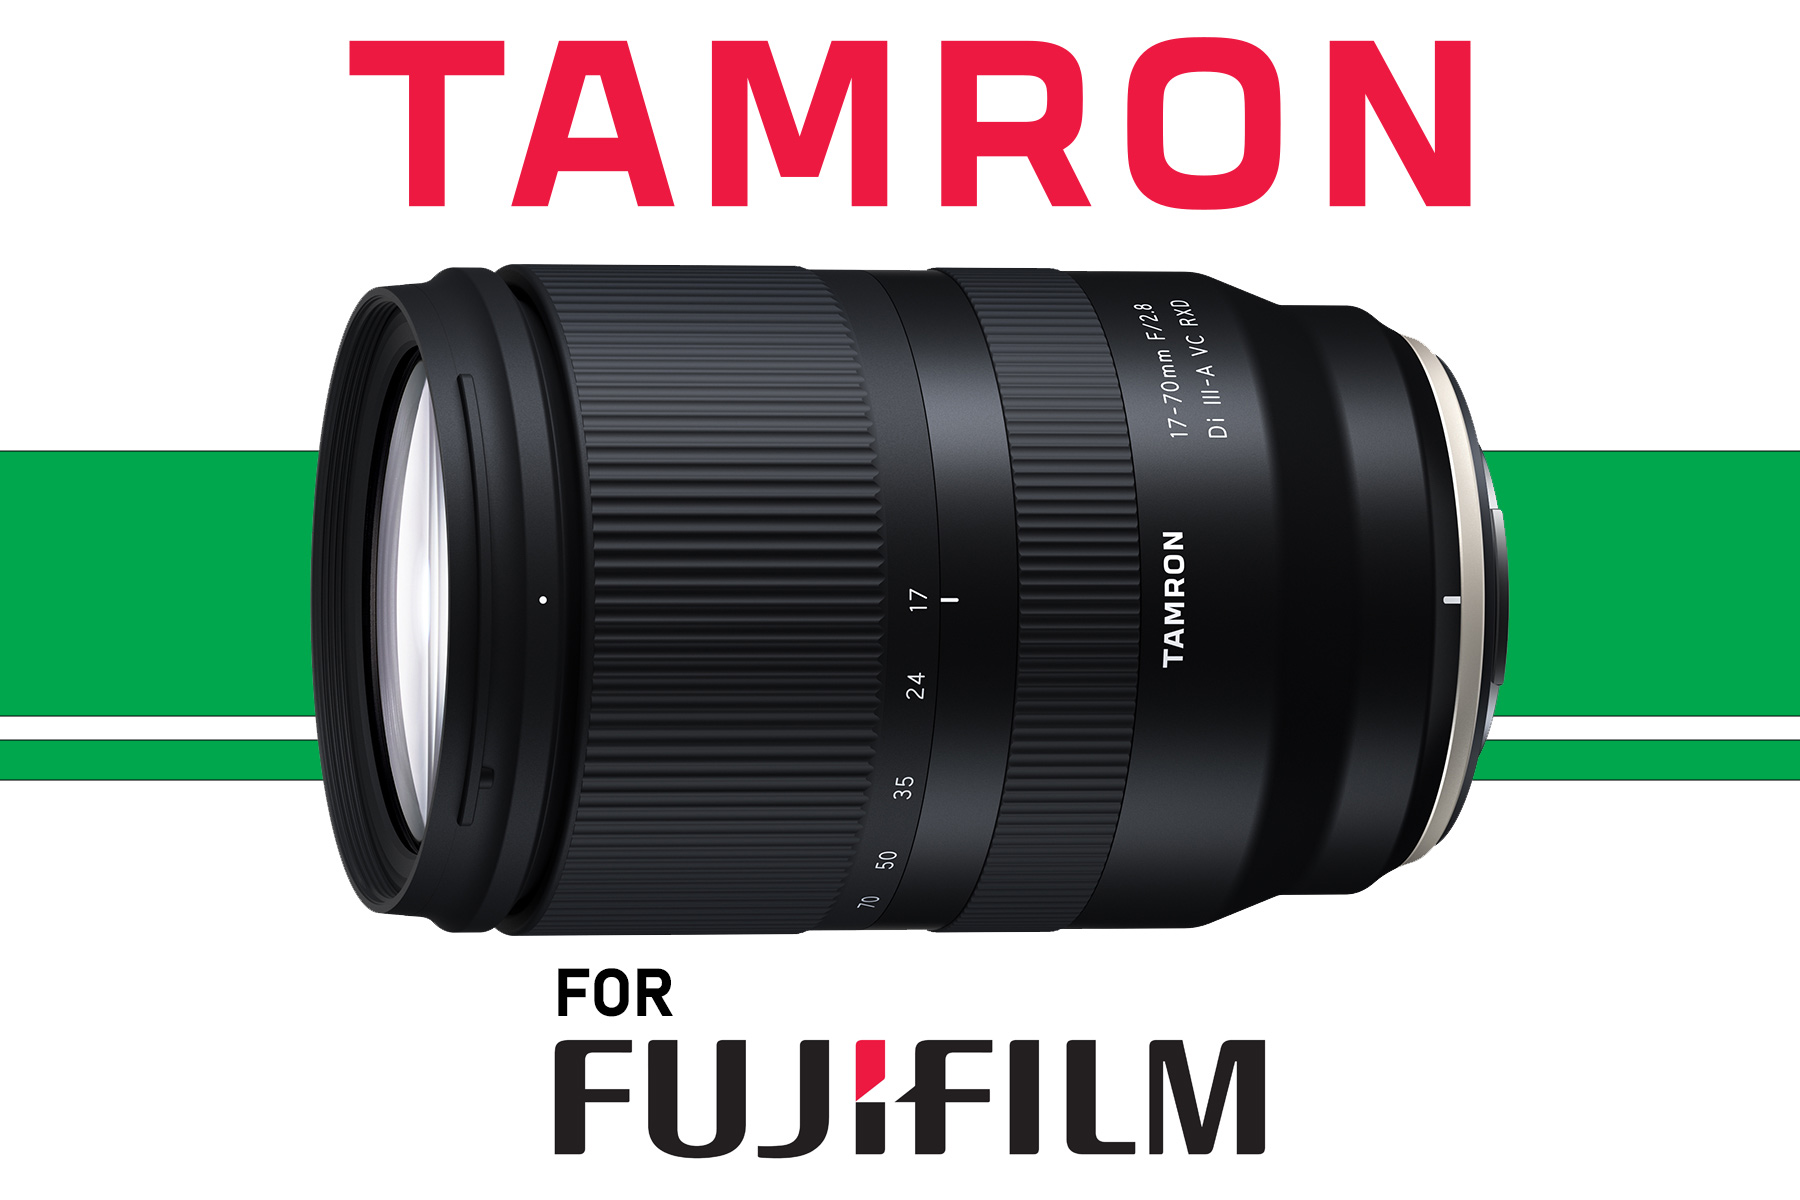 Announced: Tamron 17-70mm f/2.8 for FUJI X-Mount - Light And Matter